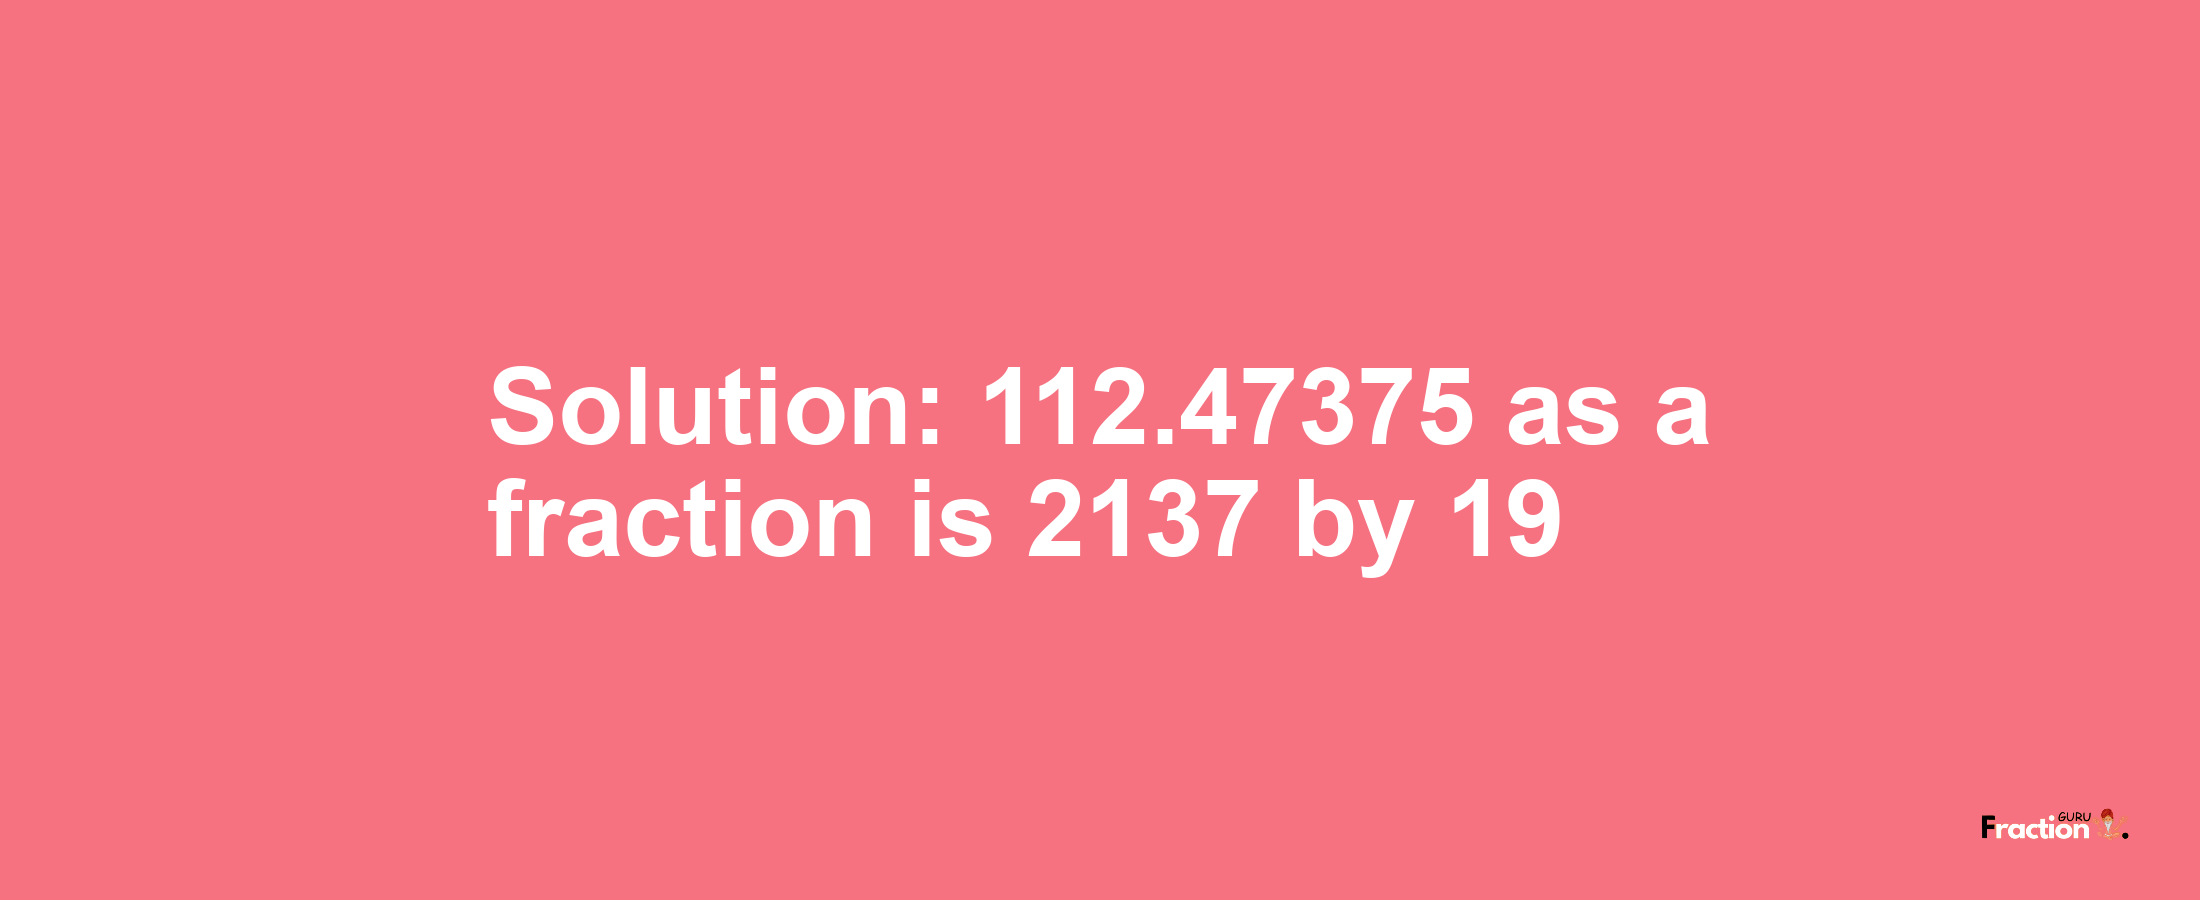 Solution:112.47375 as a fraction is 2137/19